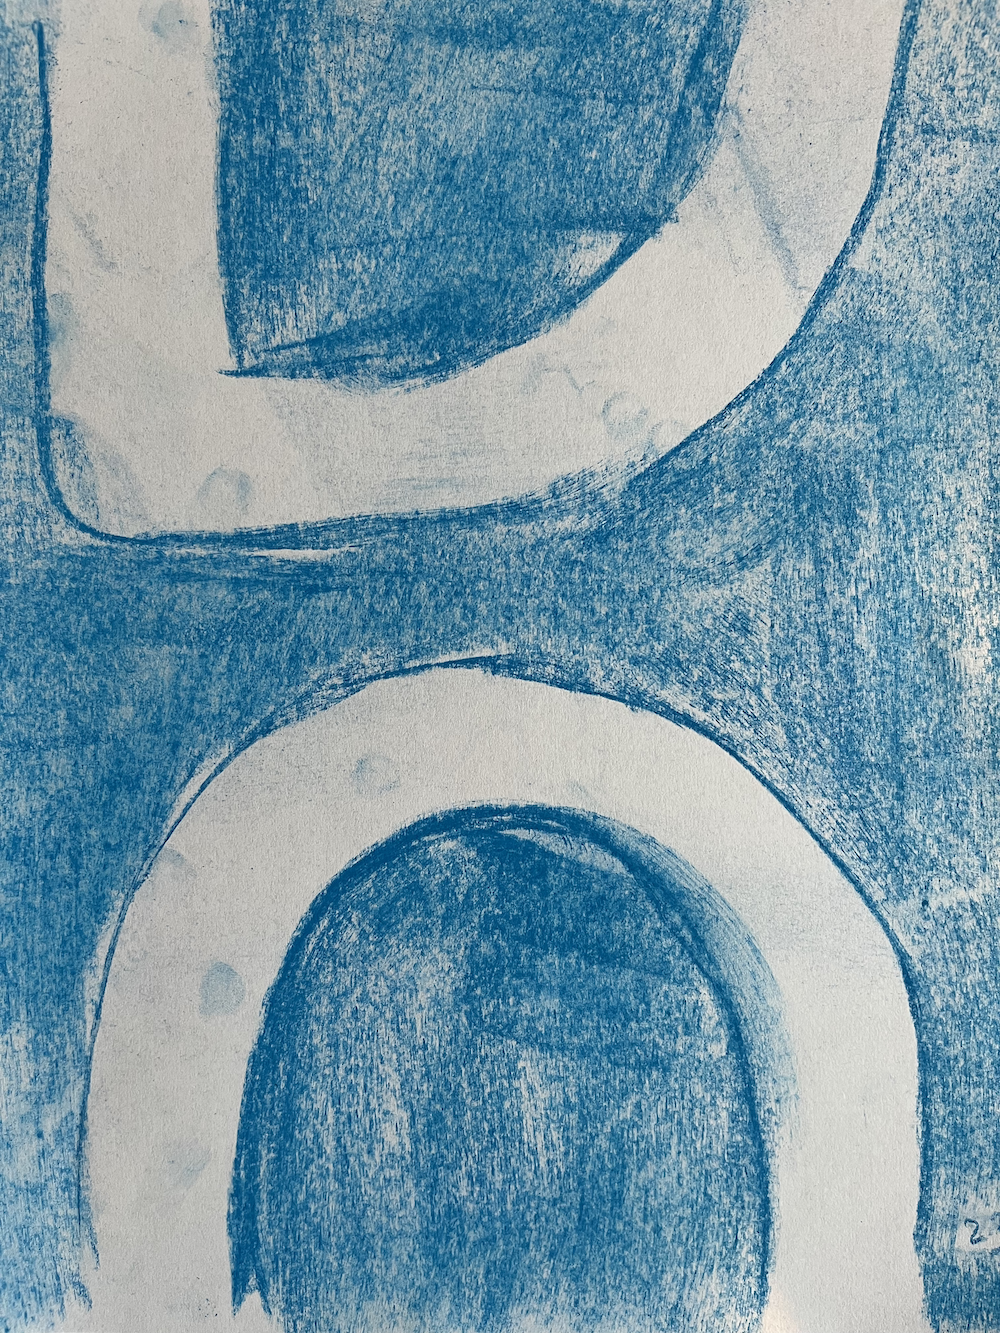 Early experiment with blue conte crayon